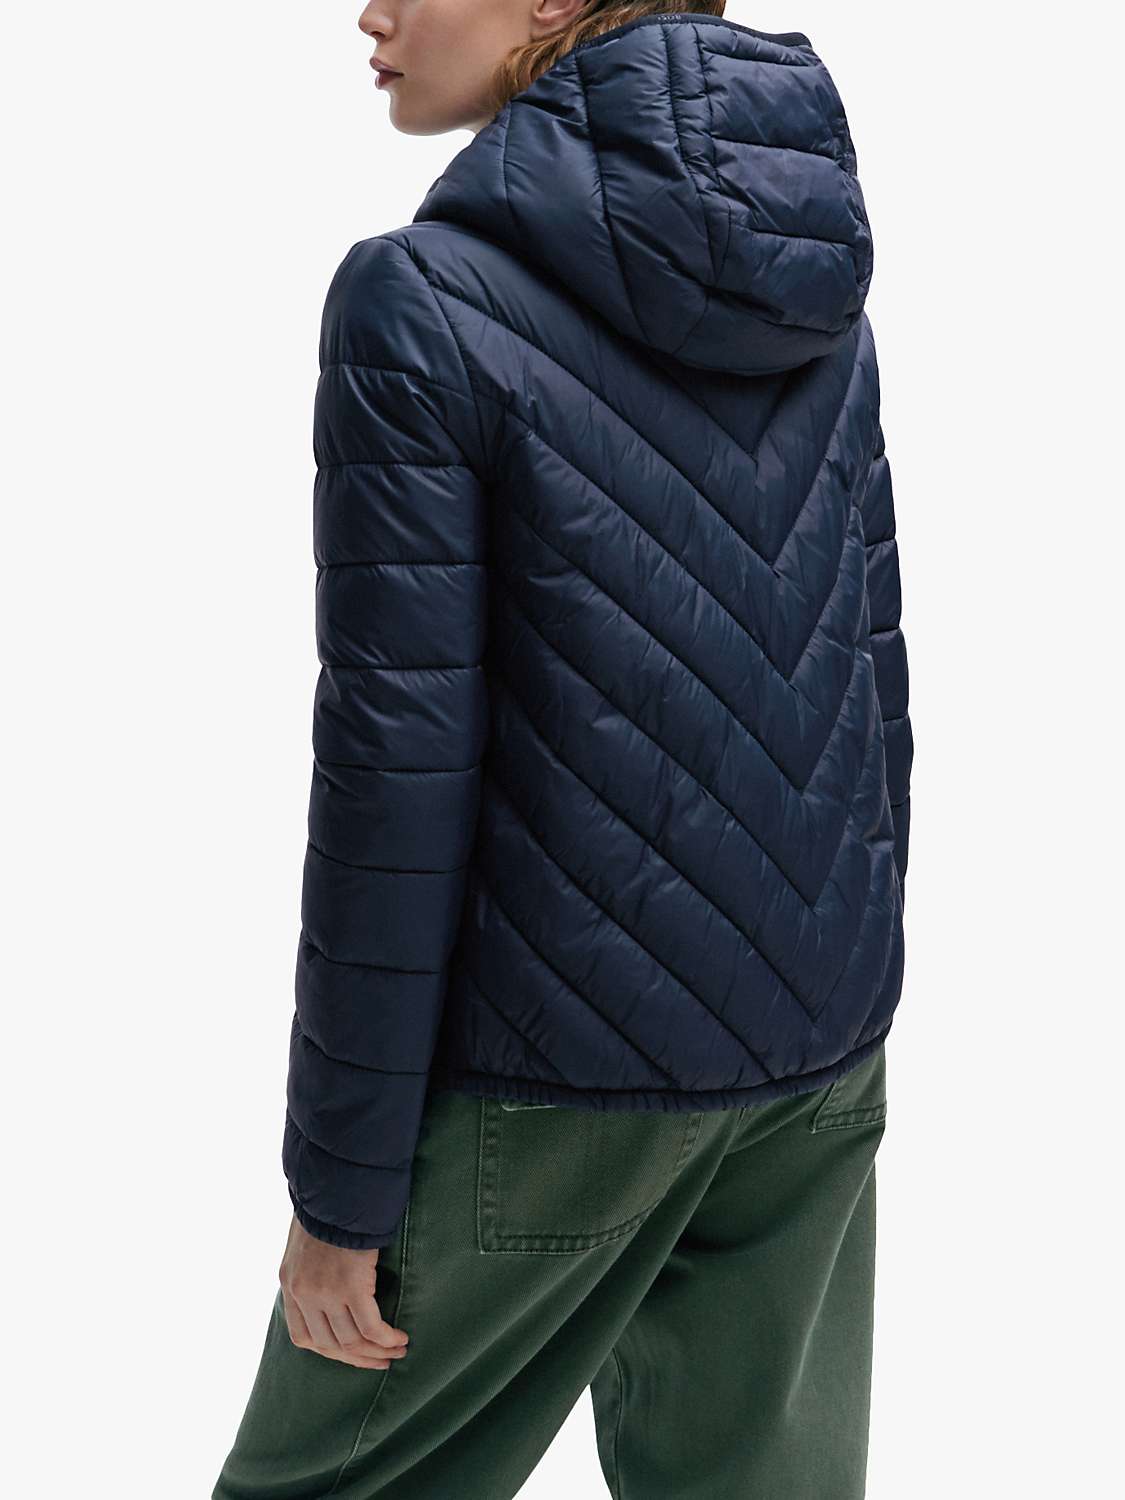 Buy BOSS Palatto Quilted Short Jacket, Navy Online at johnlewis.com